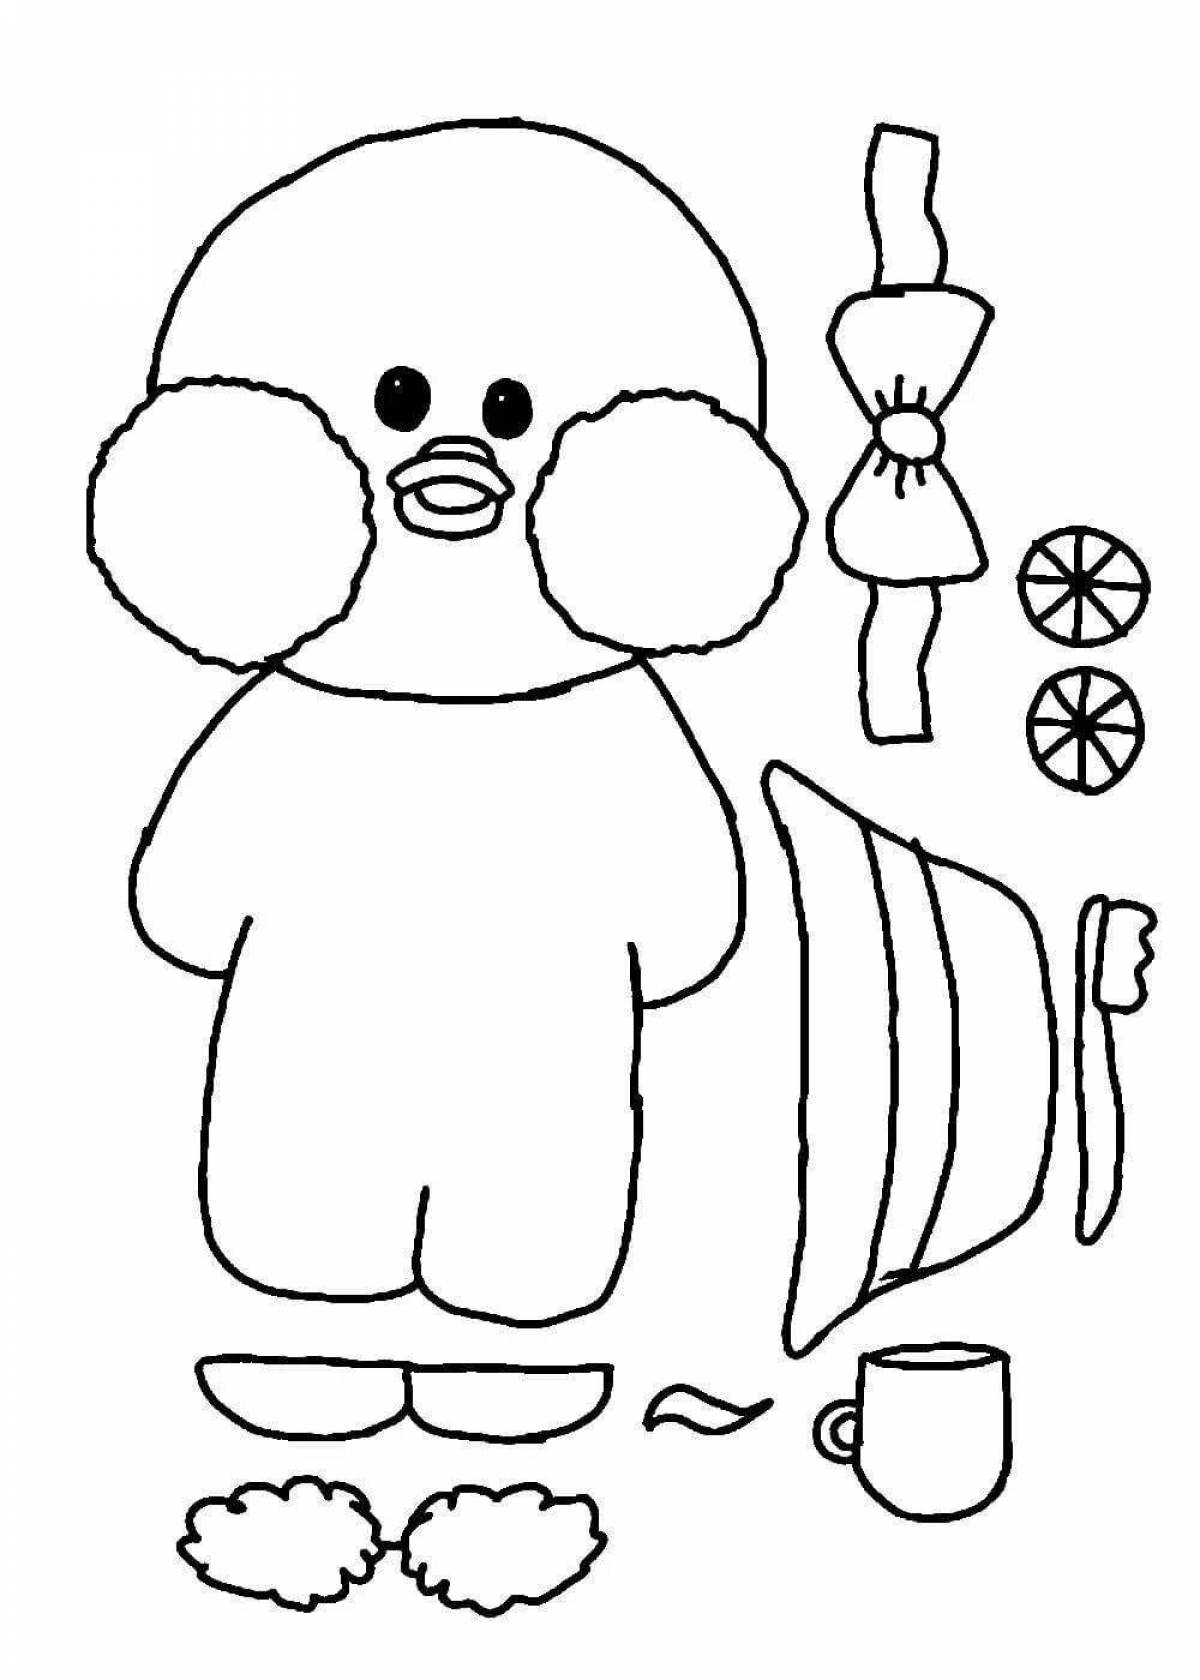 Exciting lalafanfan food coloring page